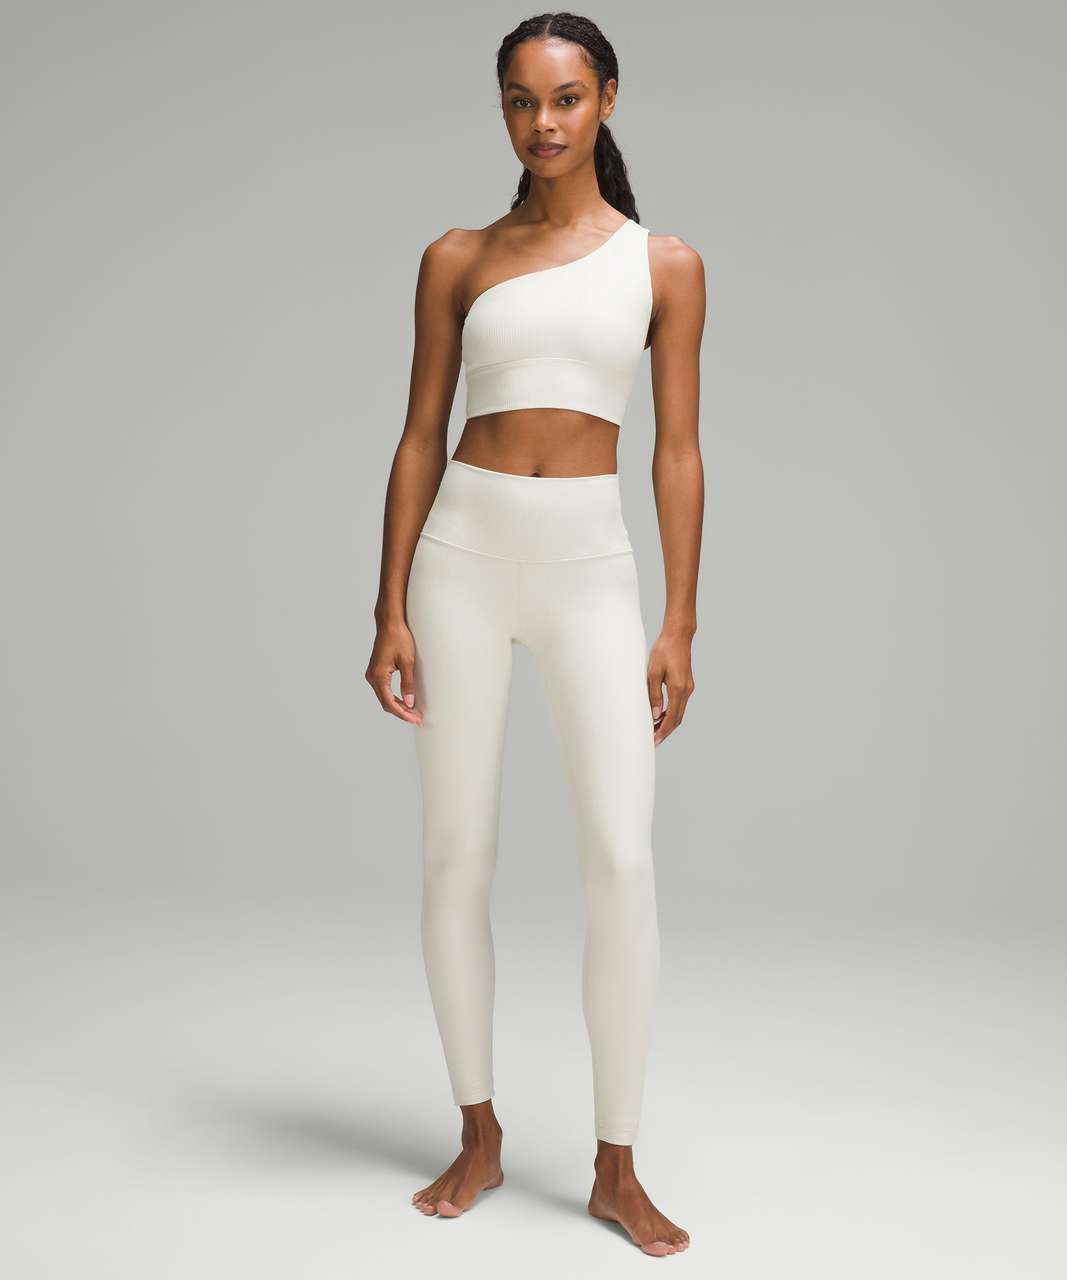 lululemon Align™ High-Rise Pant 28 Color Bone Size 12 New With